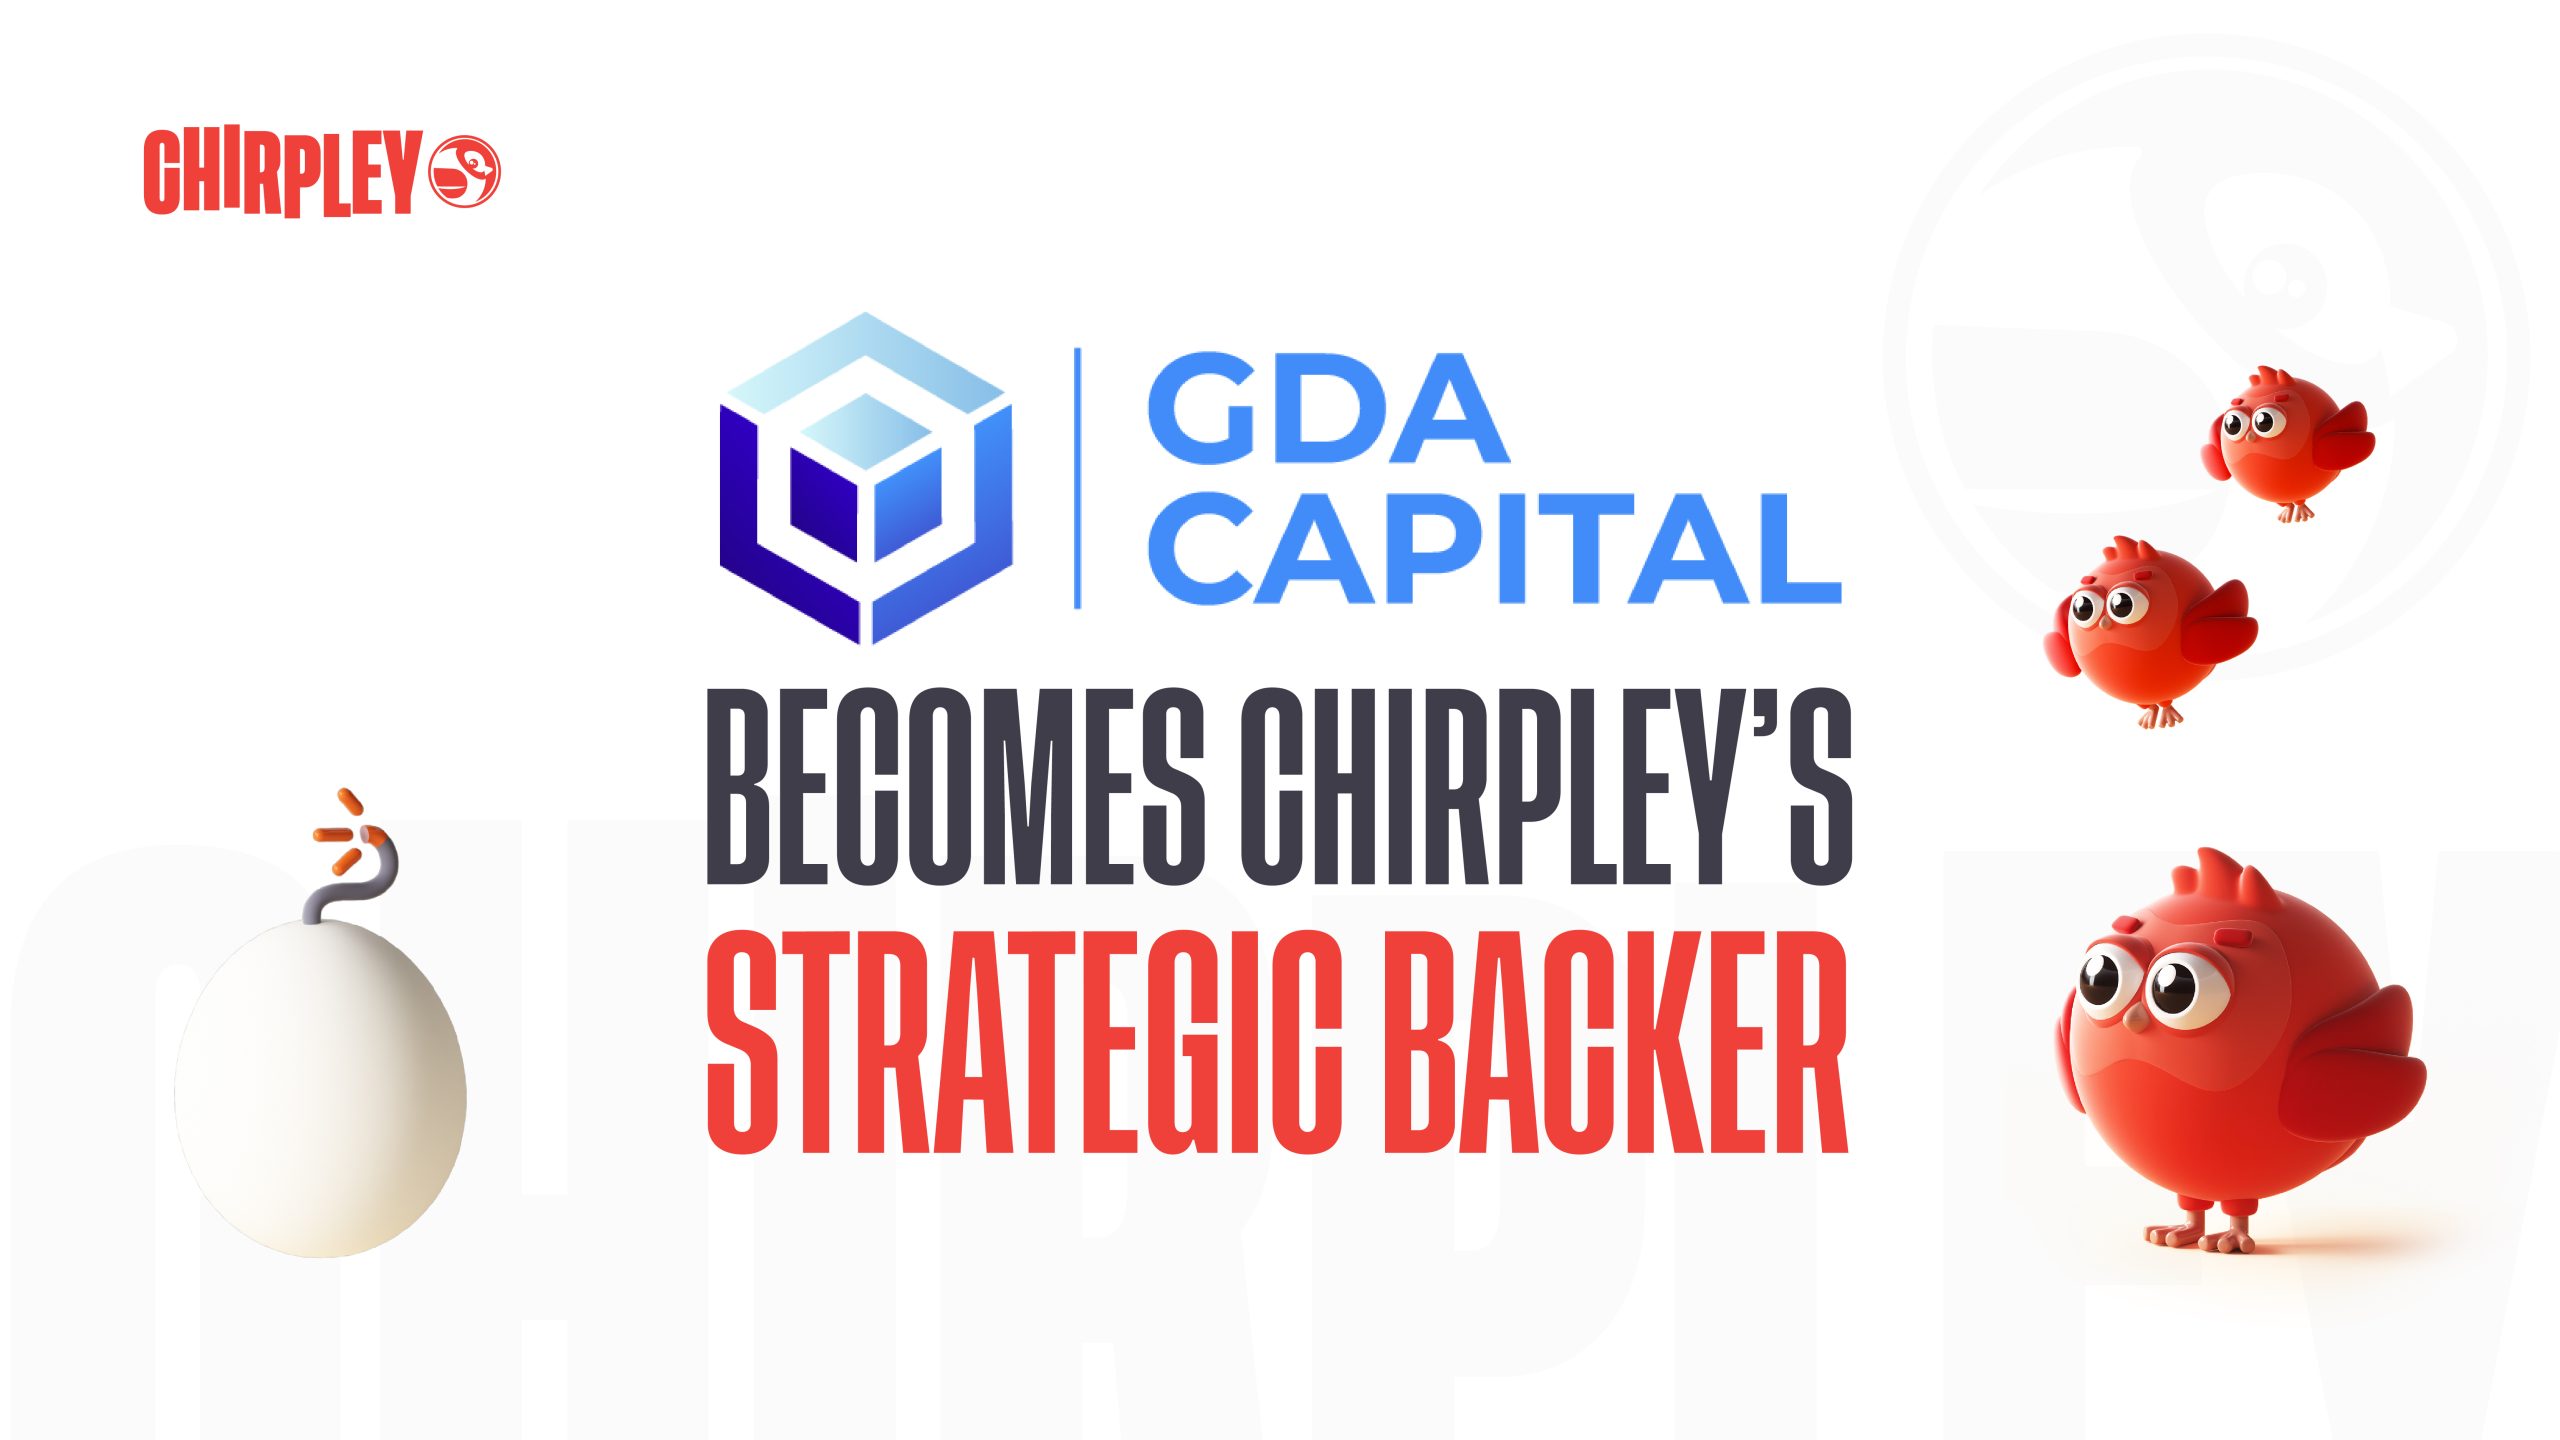 GDA Capital (GDA) Ventures Into the Future of Influencer Marketing, Backs Chirpley as a Key Venture Capital Partner with International Distribution Support – Press release Bitcoin News